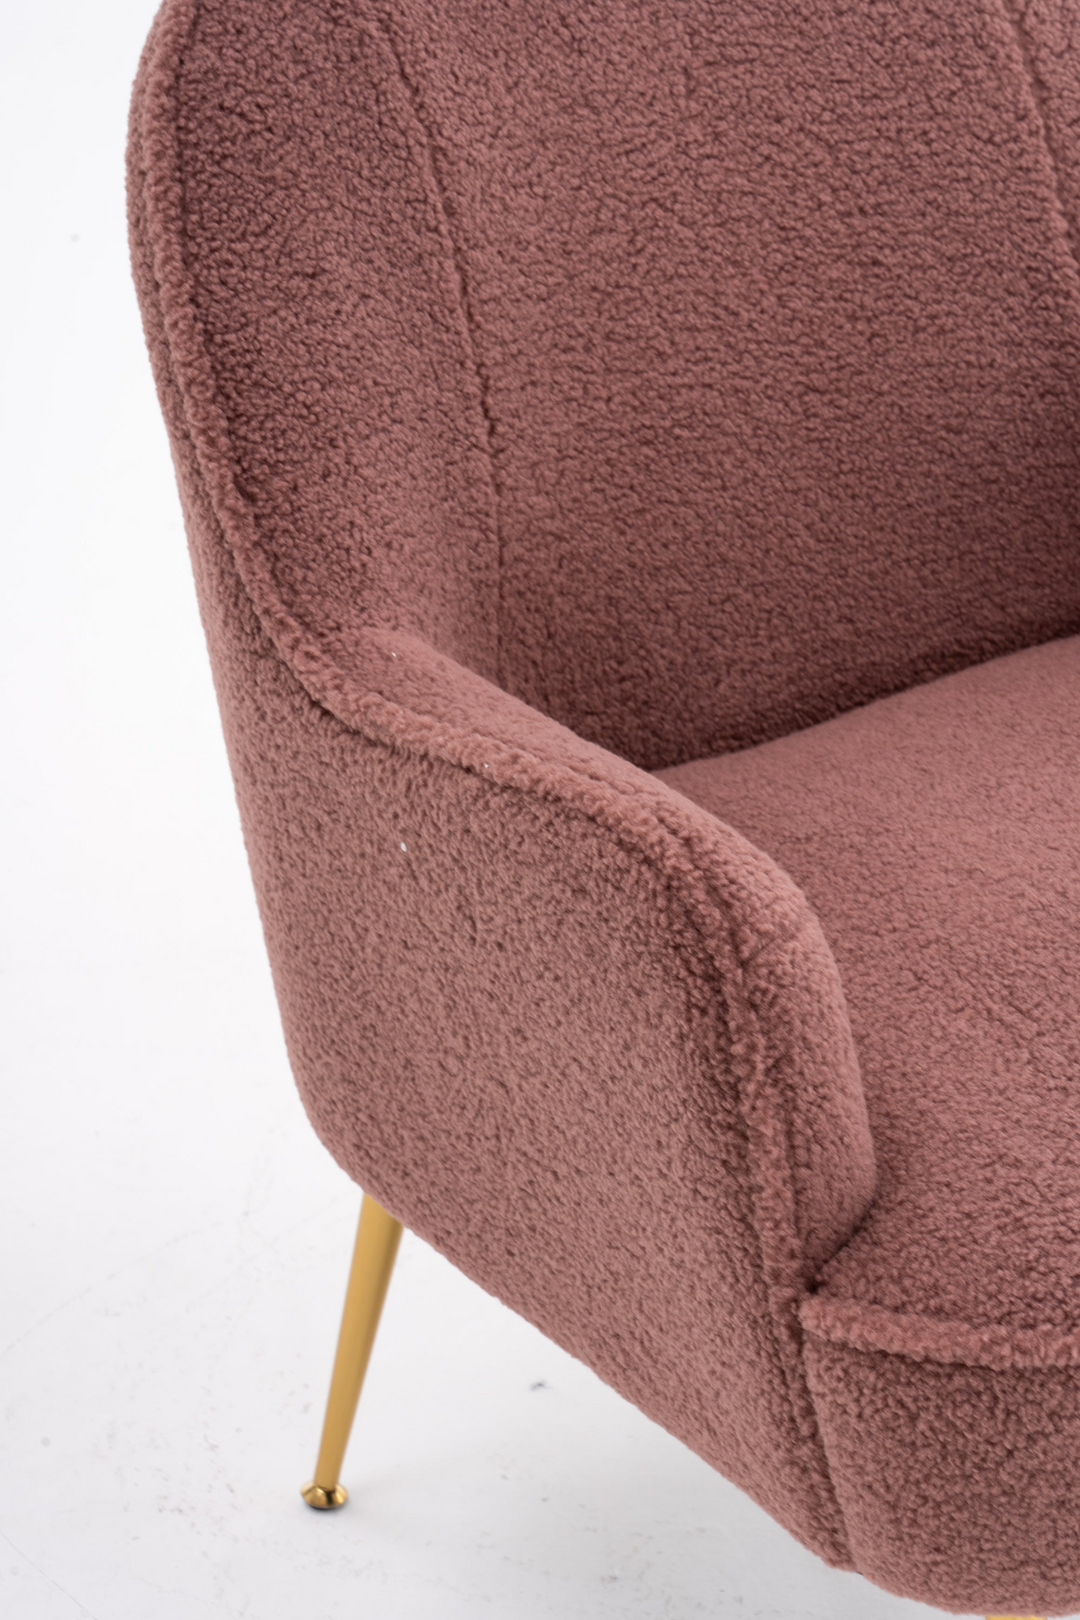 Boho Aesthetic La Lille Red Modern Soft Boucle Fabric Accent Chair With Gold Metal Legs | Biophilic Design Airbnb Decor Furniture 